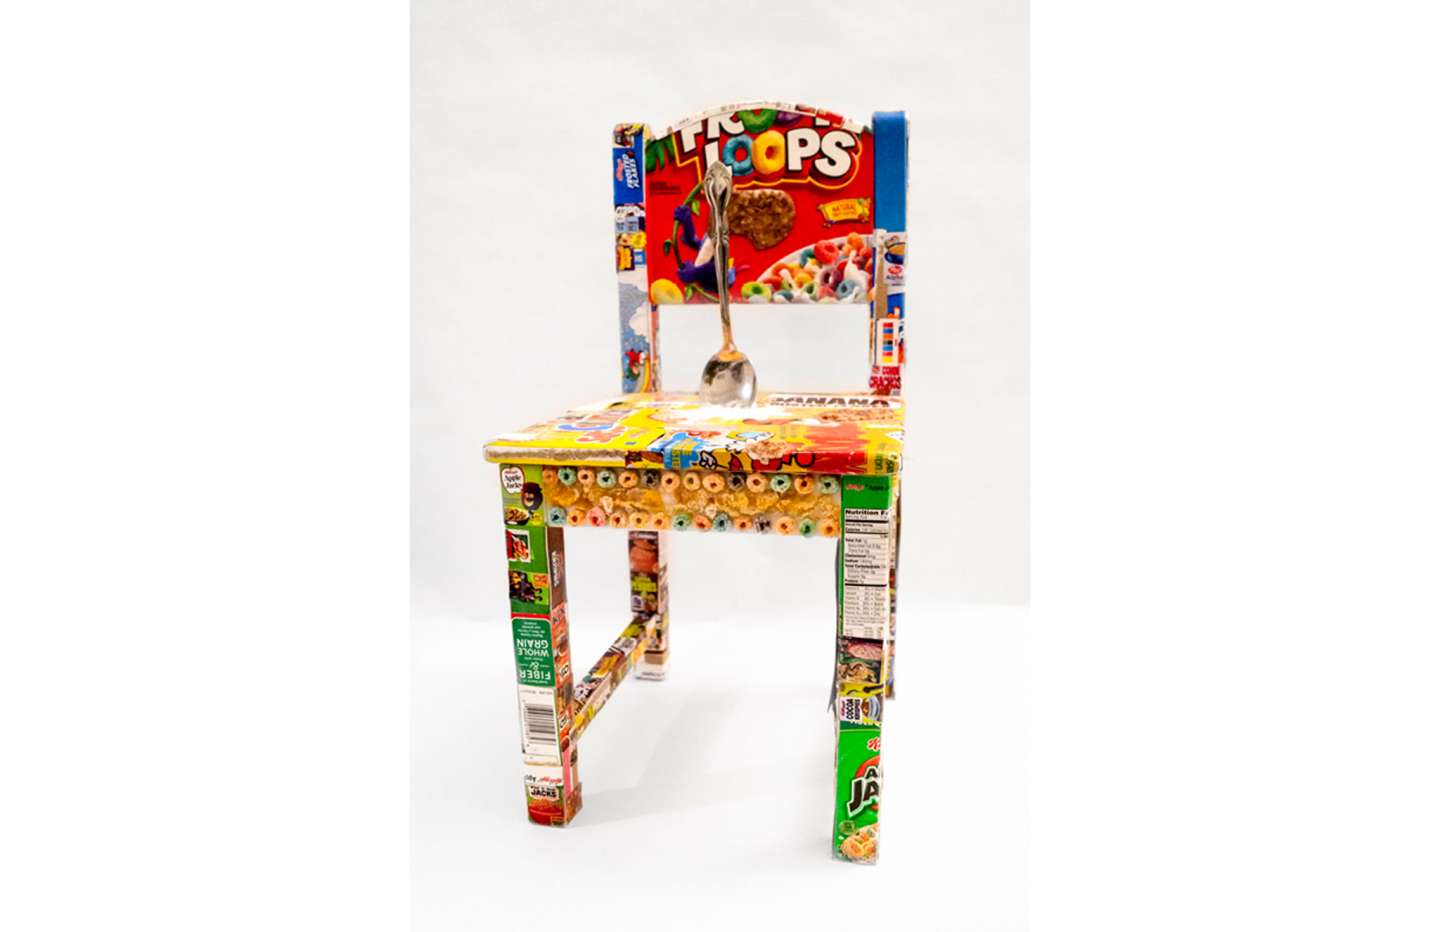 Cereal Killer Chair